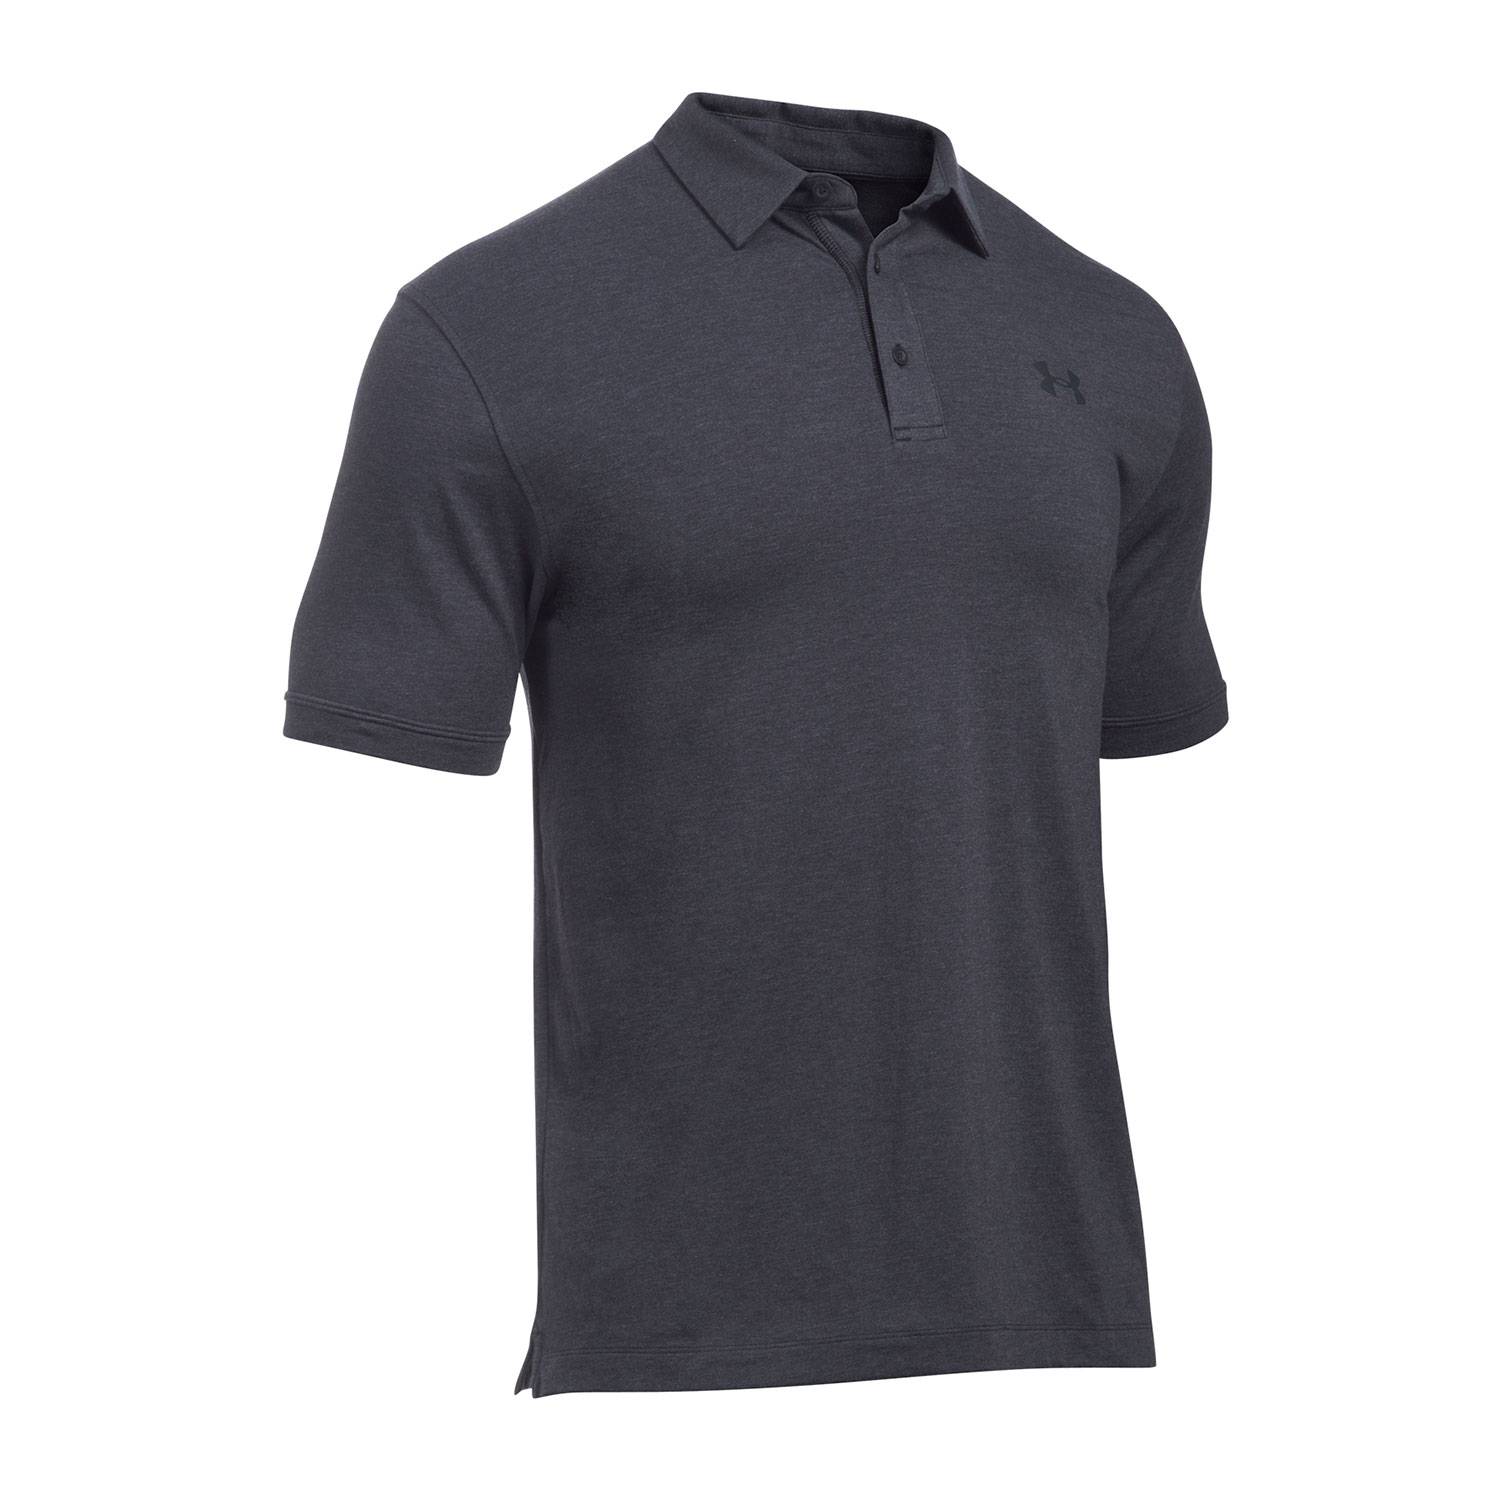 Under Armour Tactical Charged Cotton Polo